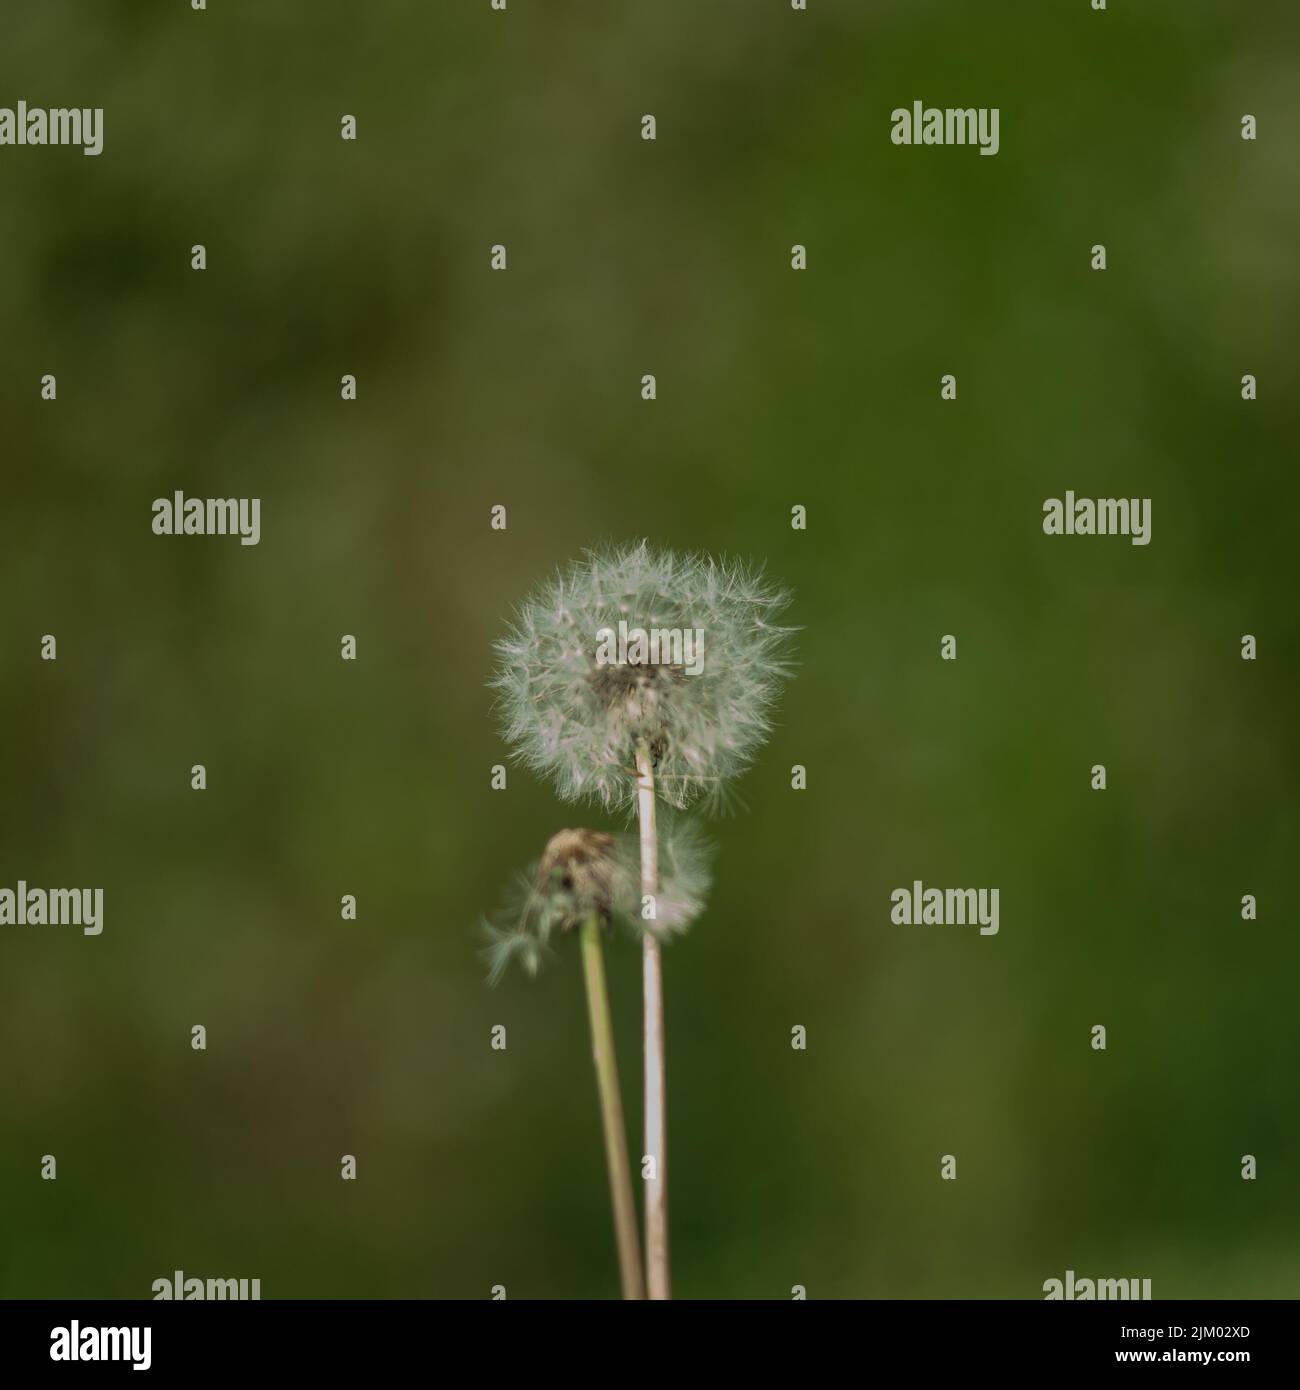 Spring S Whisper: Dandelion Meadow Bathed in Evening Light Stock Image -  Image of idyllic, china: 291028515